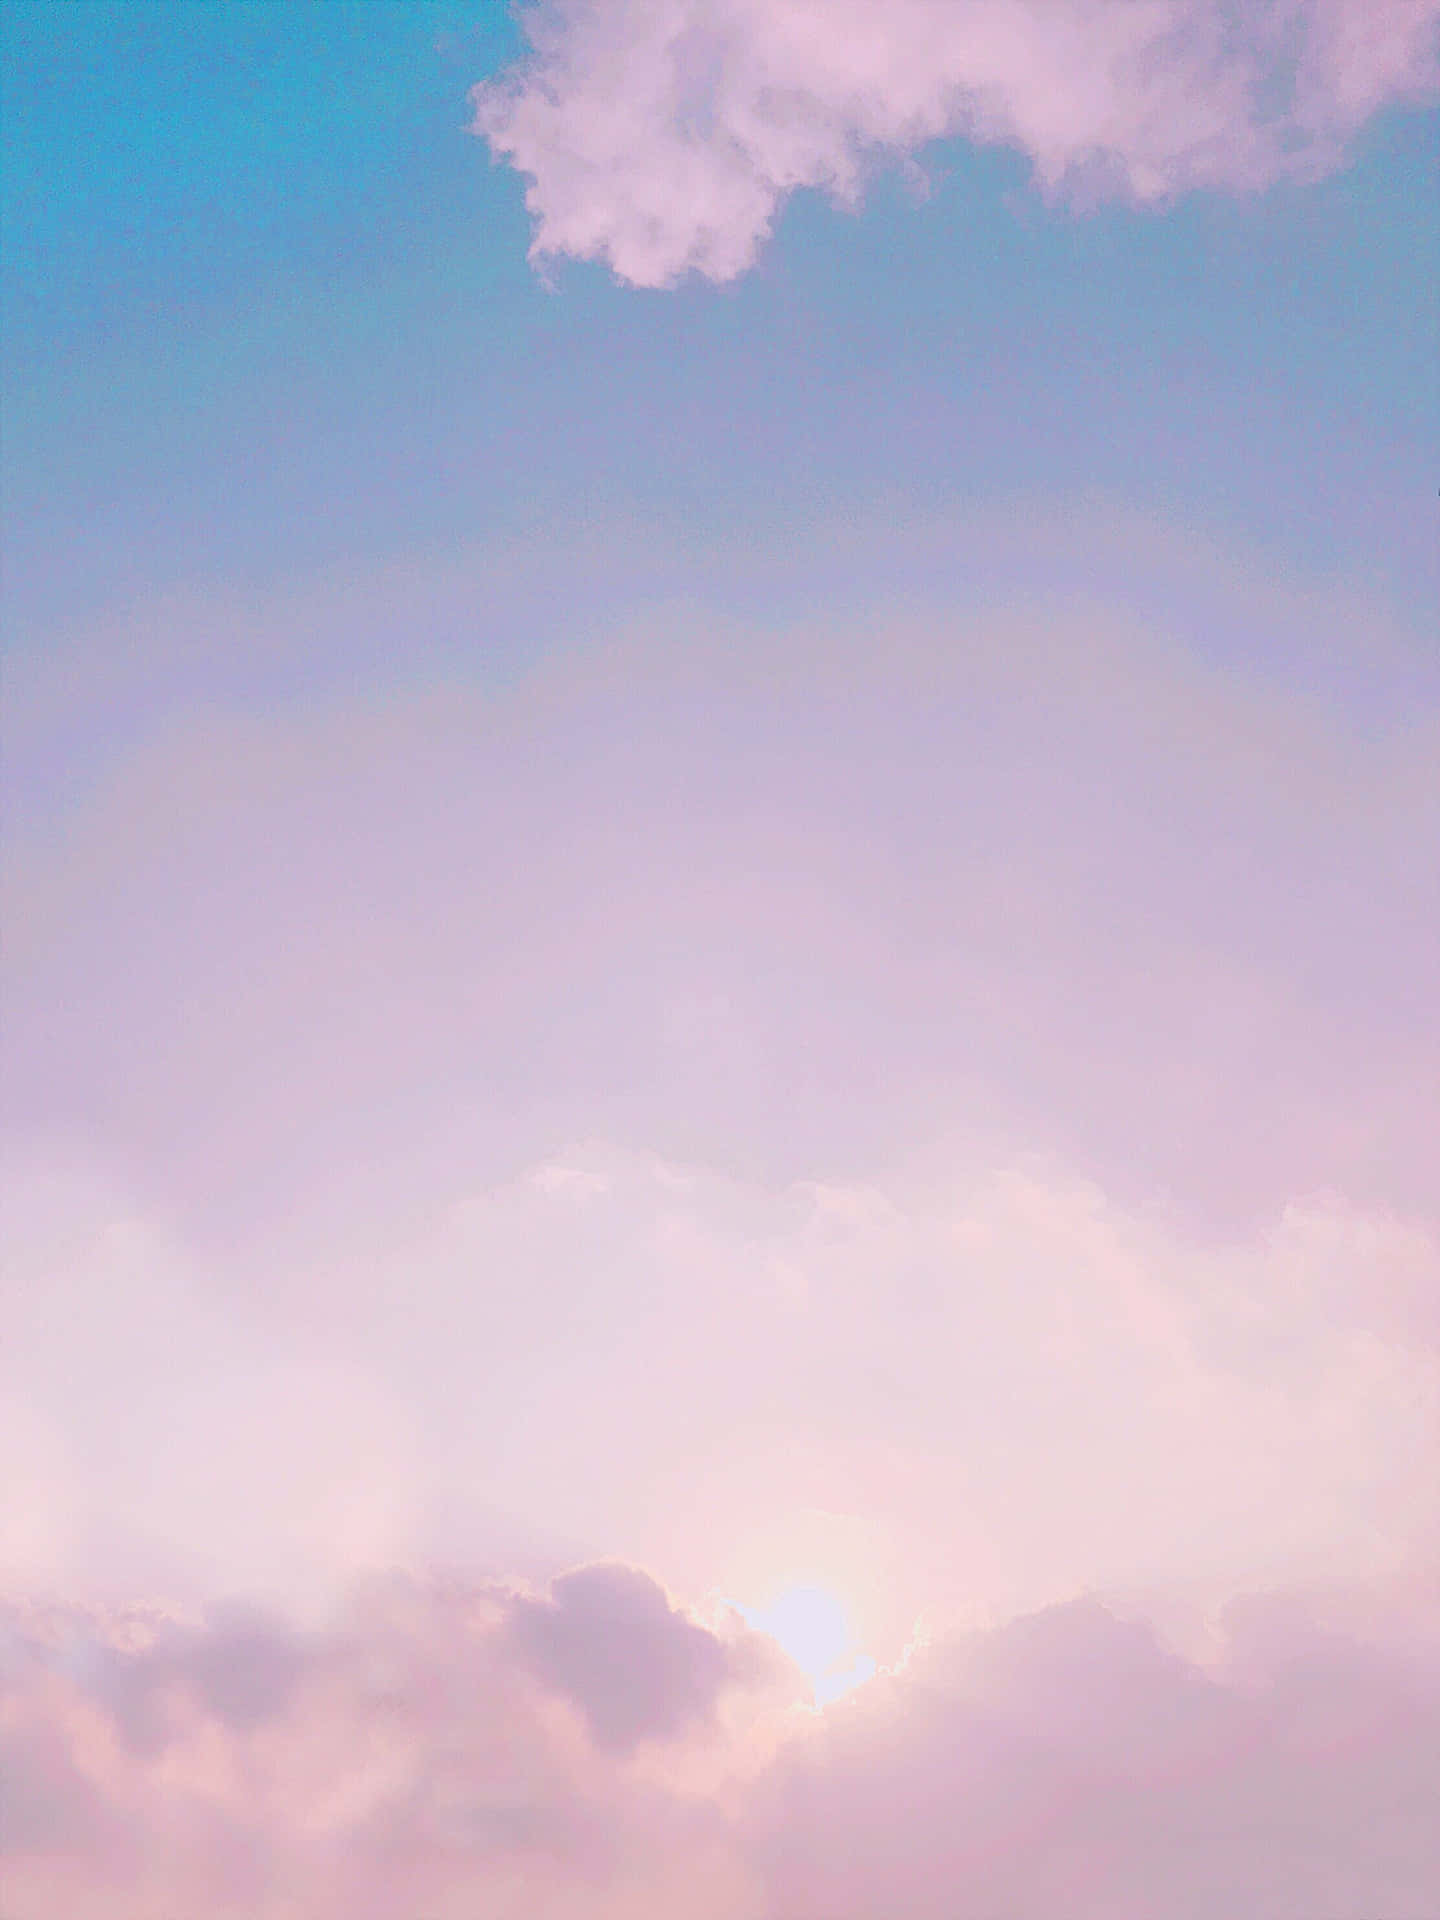 Dreamy Pink and Blue clouds in the sky Wallpaper